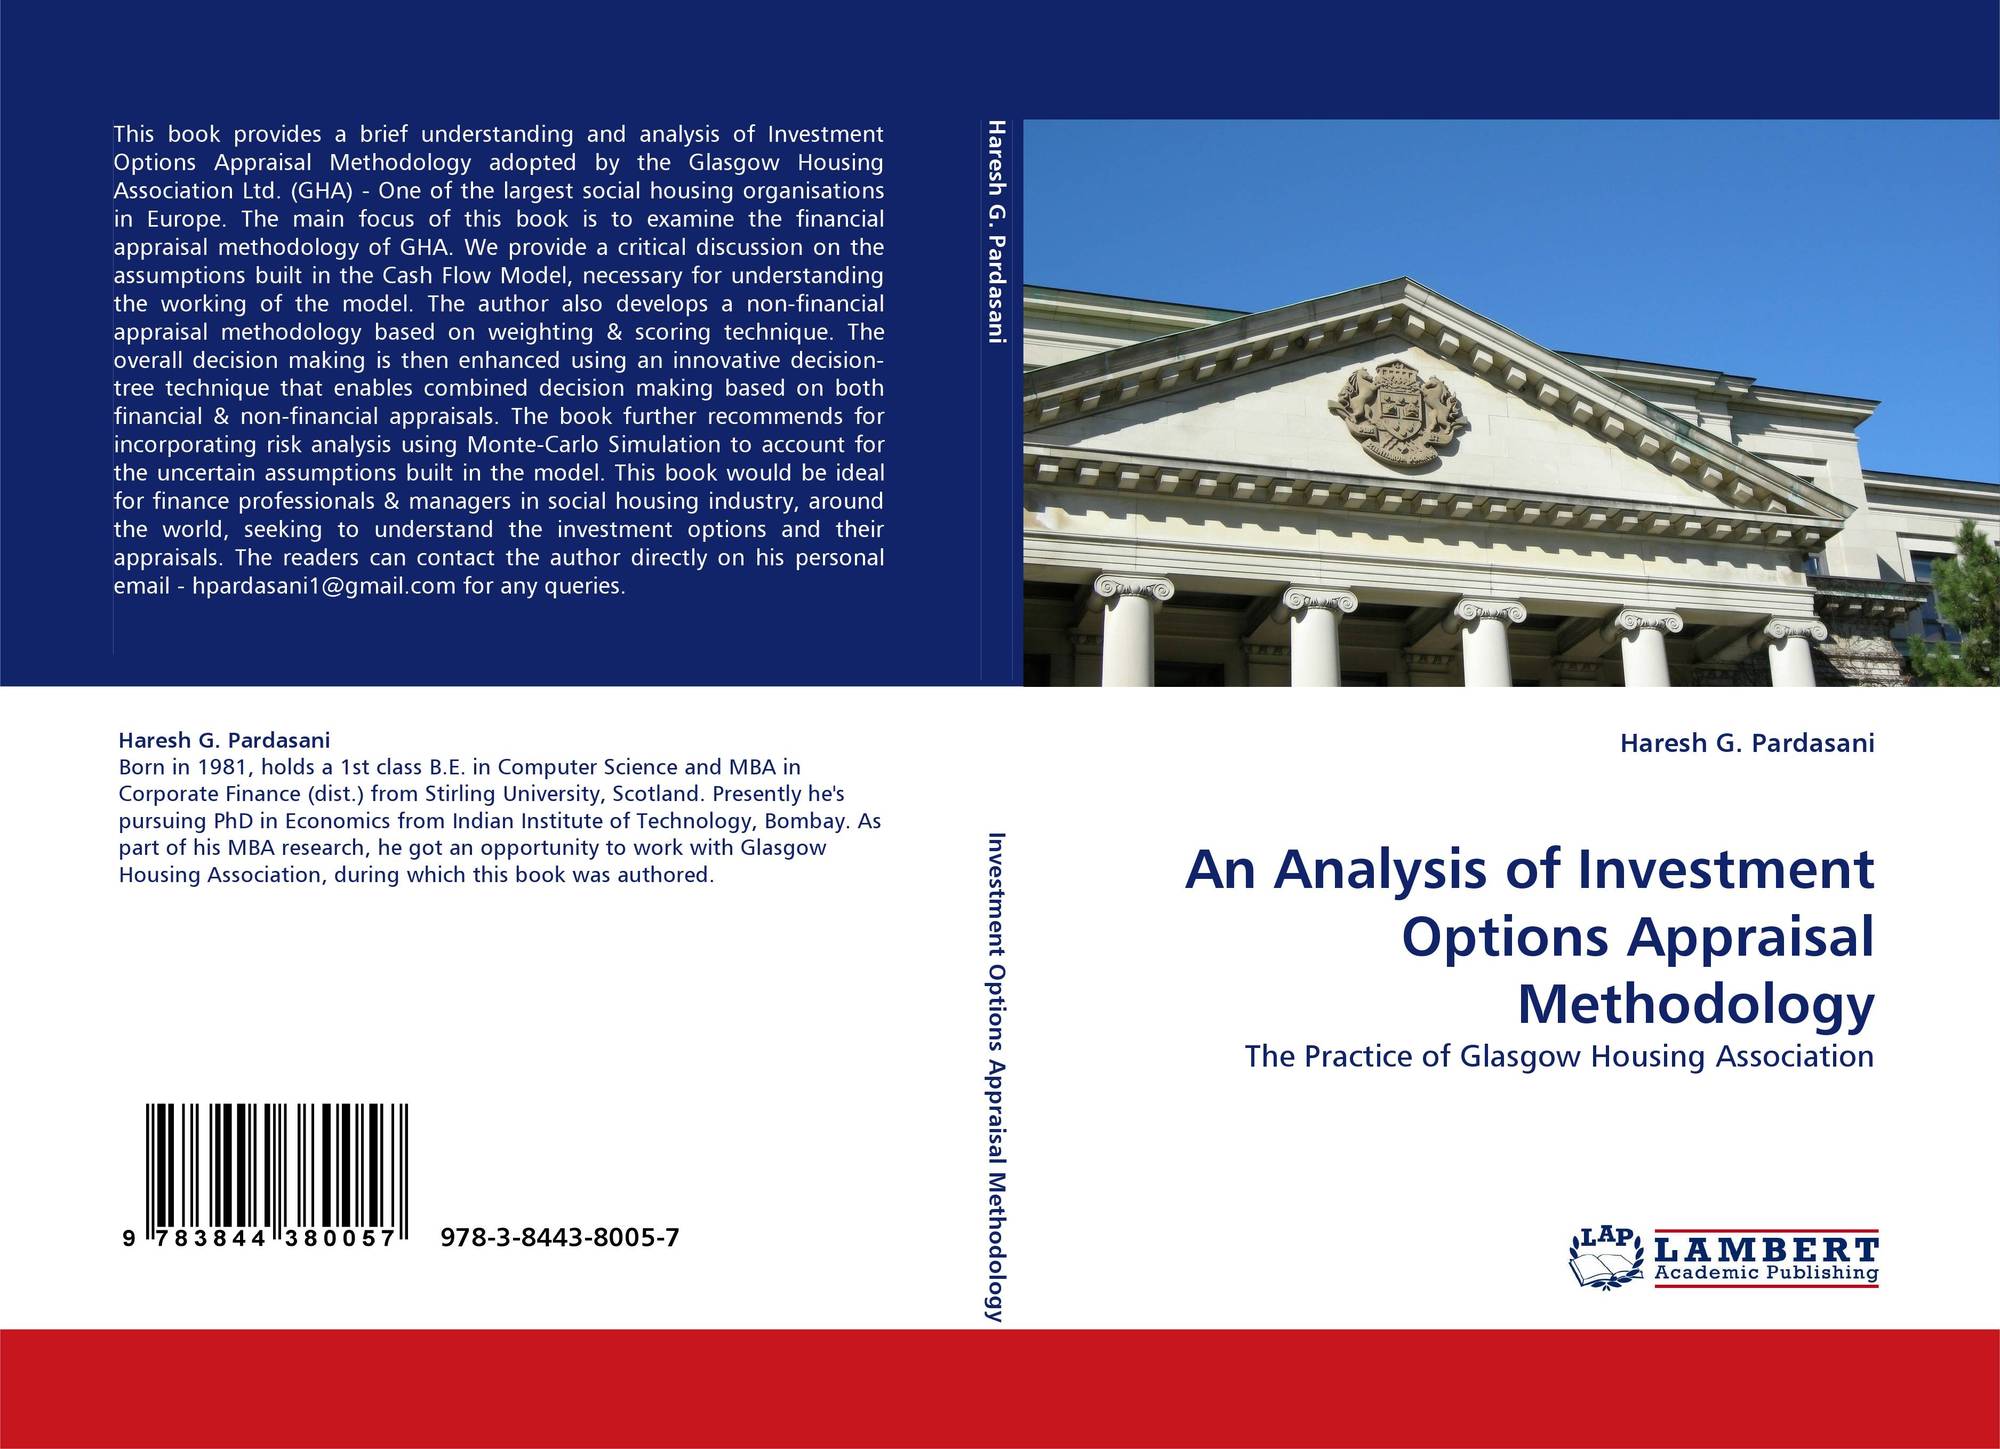 Thesis investment appraisal